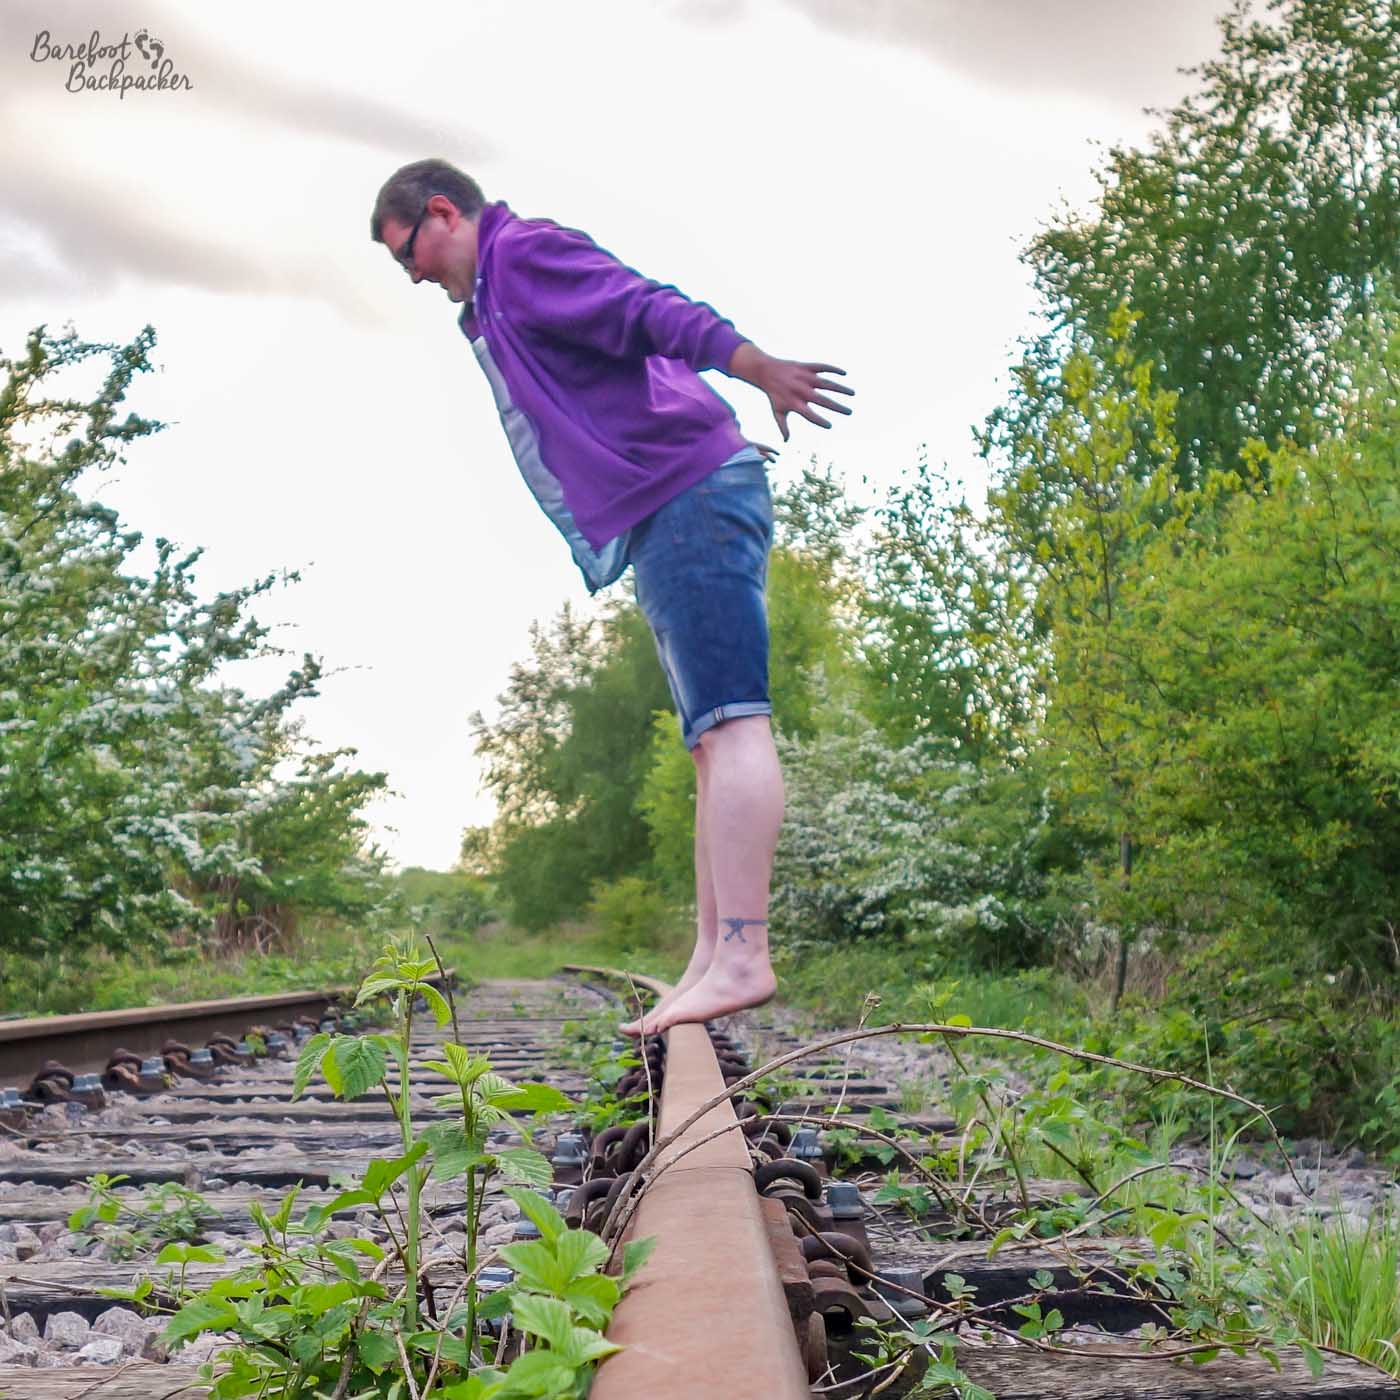 Disused railway line, with vegetation growing across it. An enby is standing on one of the rails, parallel to it and side-on to the camera. They are barefoot, their legs are straight, and they are leaning forward from the waist with arms slightly raised wide, clearly about to fall off.